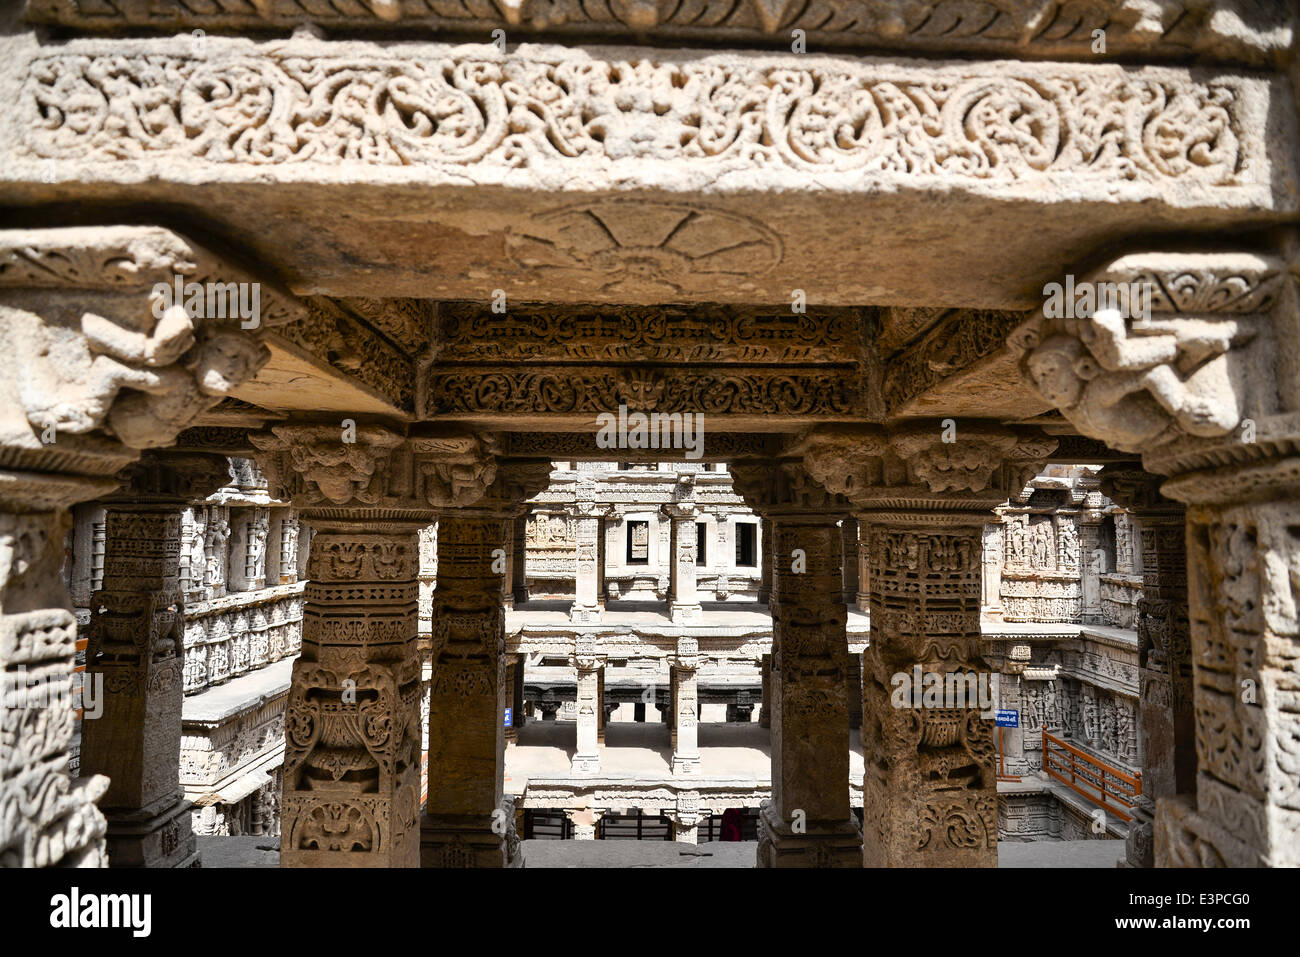 The intricate carvings on the structures of   'Rani-ki-Vav'. Rani Ki Vav is one of the finest stepwells in India. It is  a  stepwell in Gujarat built in the 11th century in memory of King Bhimdev I of the Solanki dynasty. The stepwell was approved by UNESCO as  World Heritage Site for its exceptional example of technological development   in utilizing ground water resources. (Photo by Nisarg Lakhamani/Pacific Press) Stock Photo